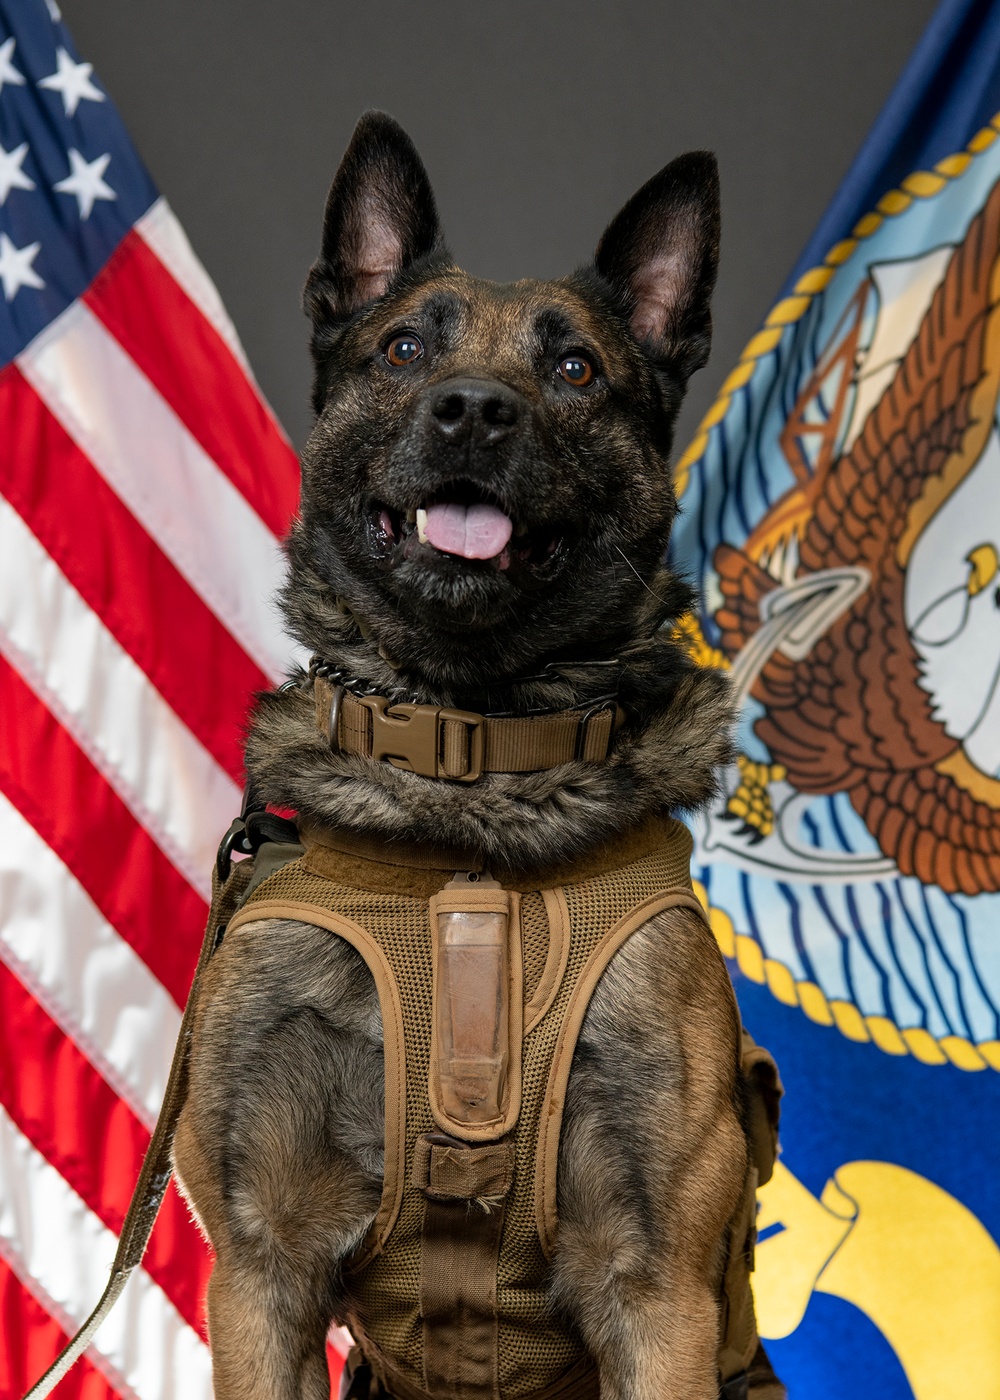 DVIDS - News - Navy SEAL Military Working Dog Retires